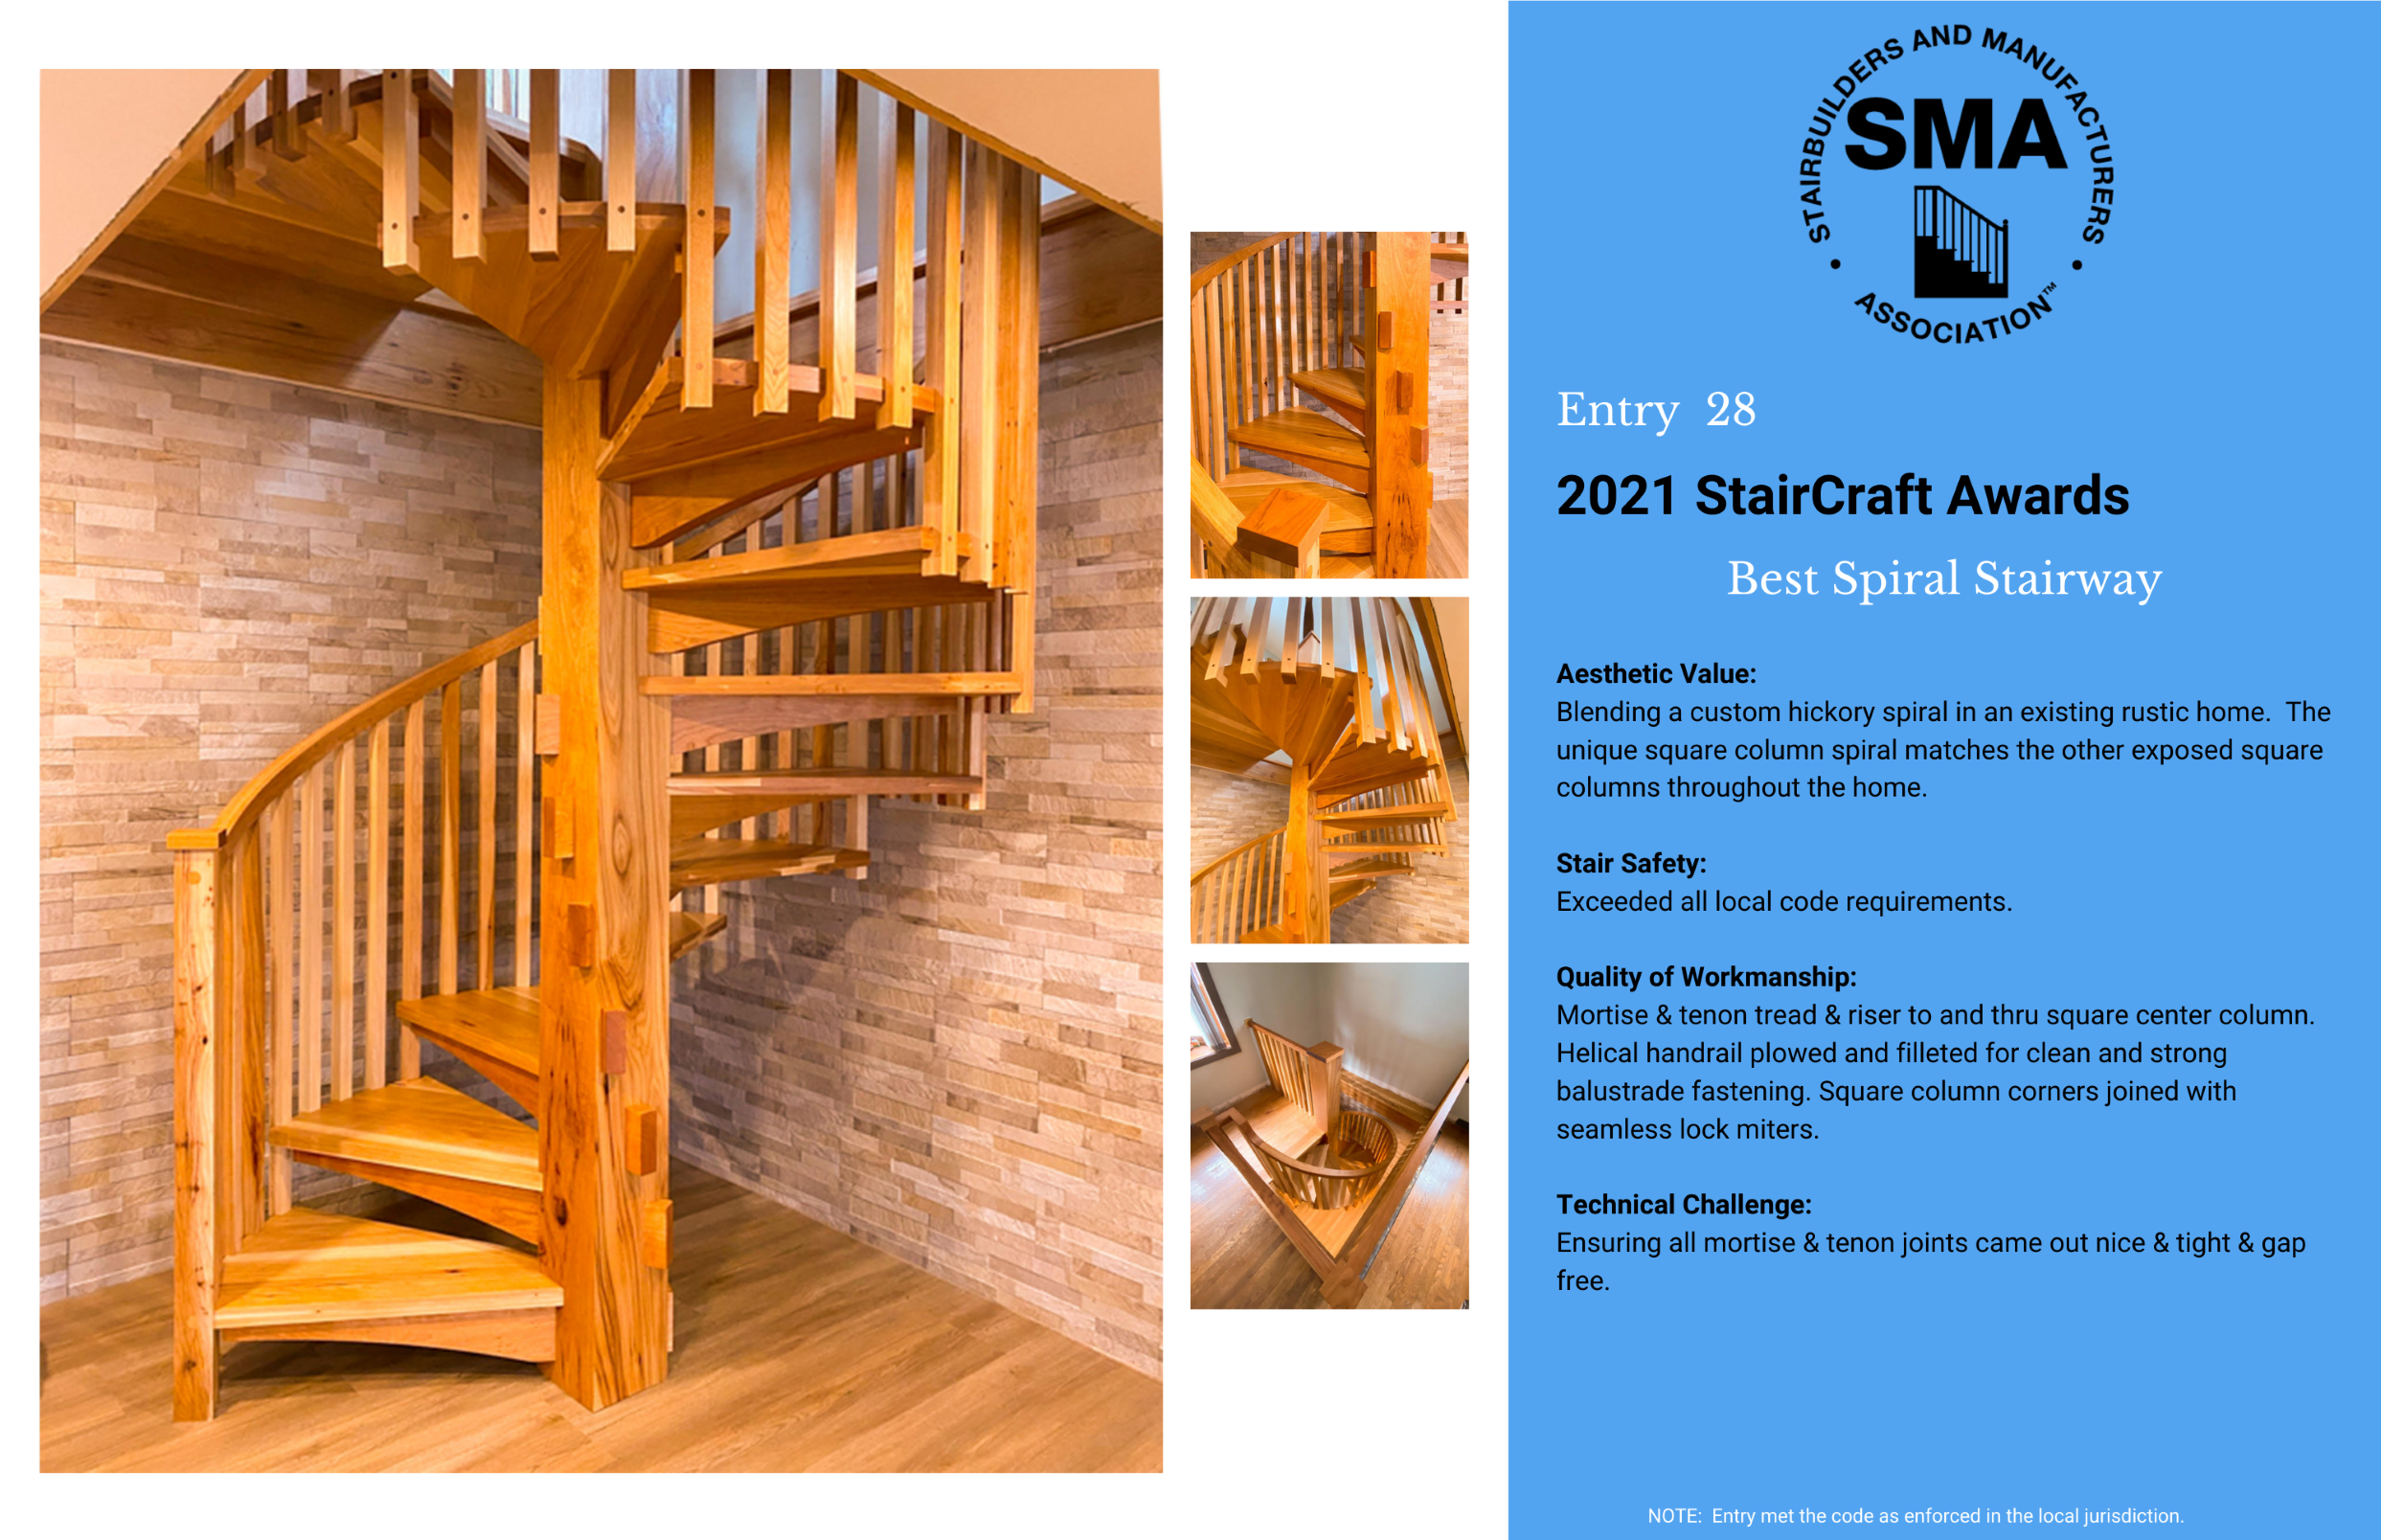 2021 StairCraft Awards Entry 28